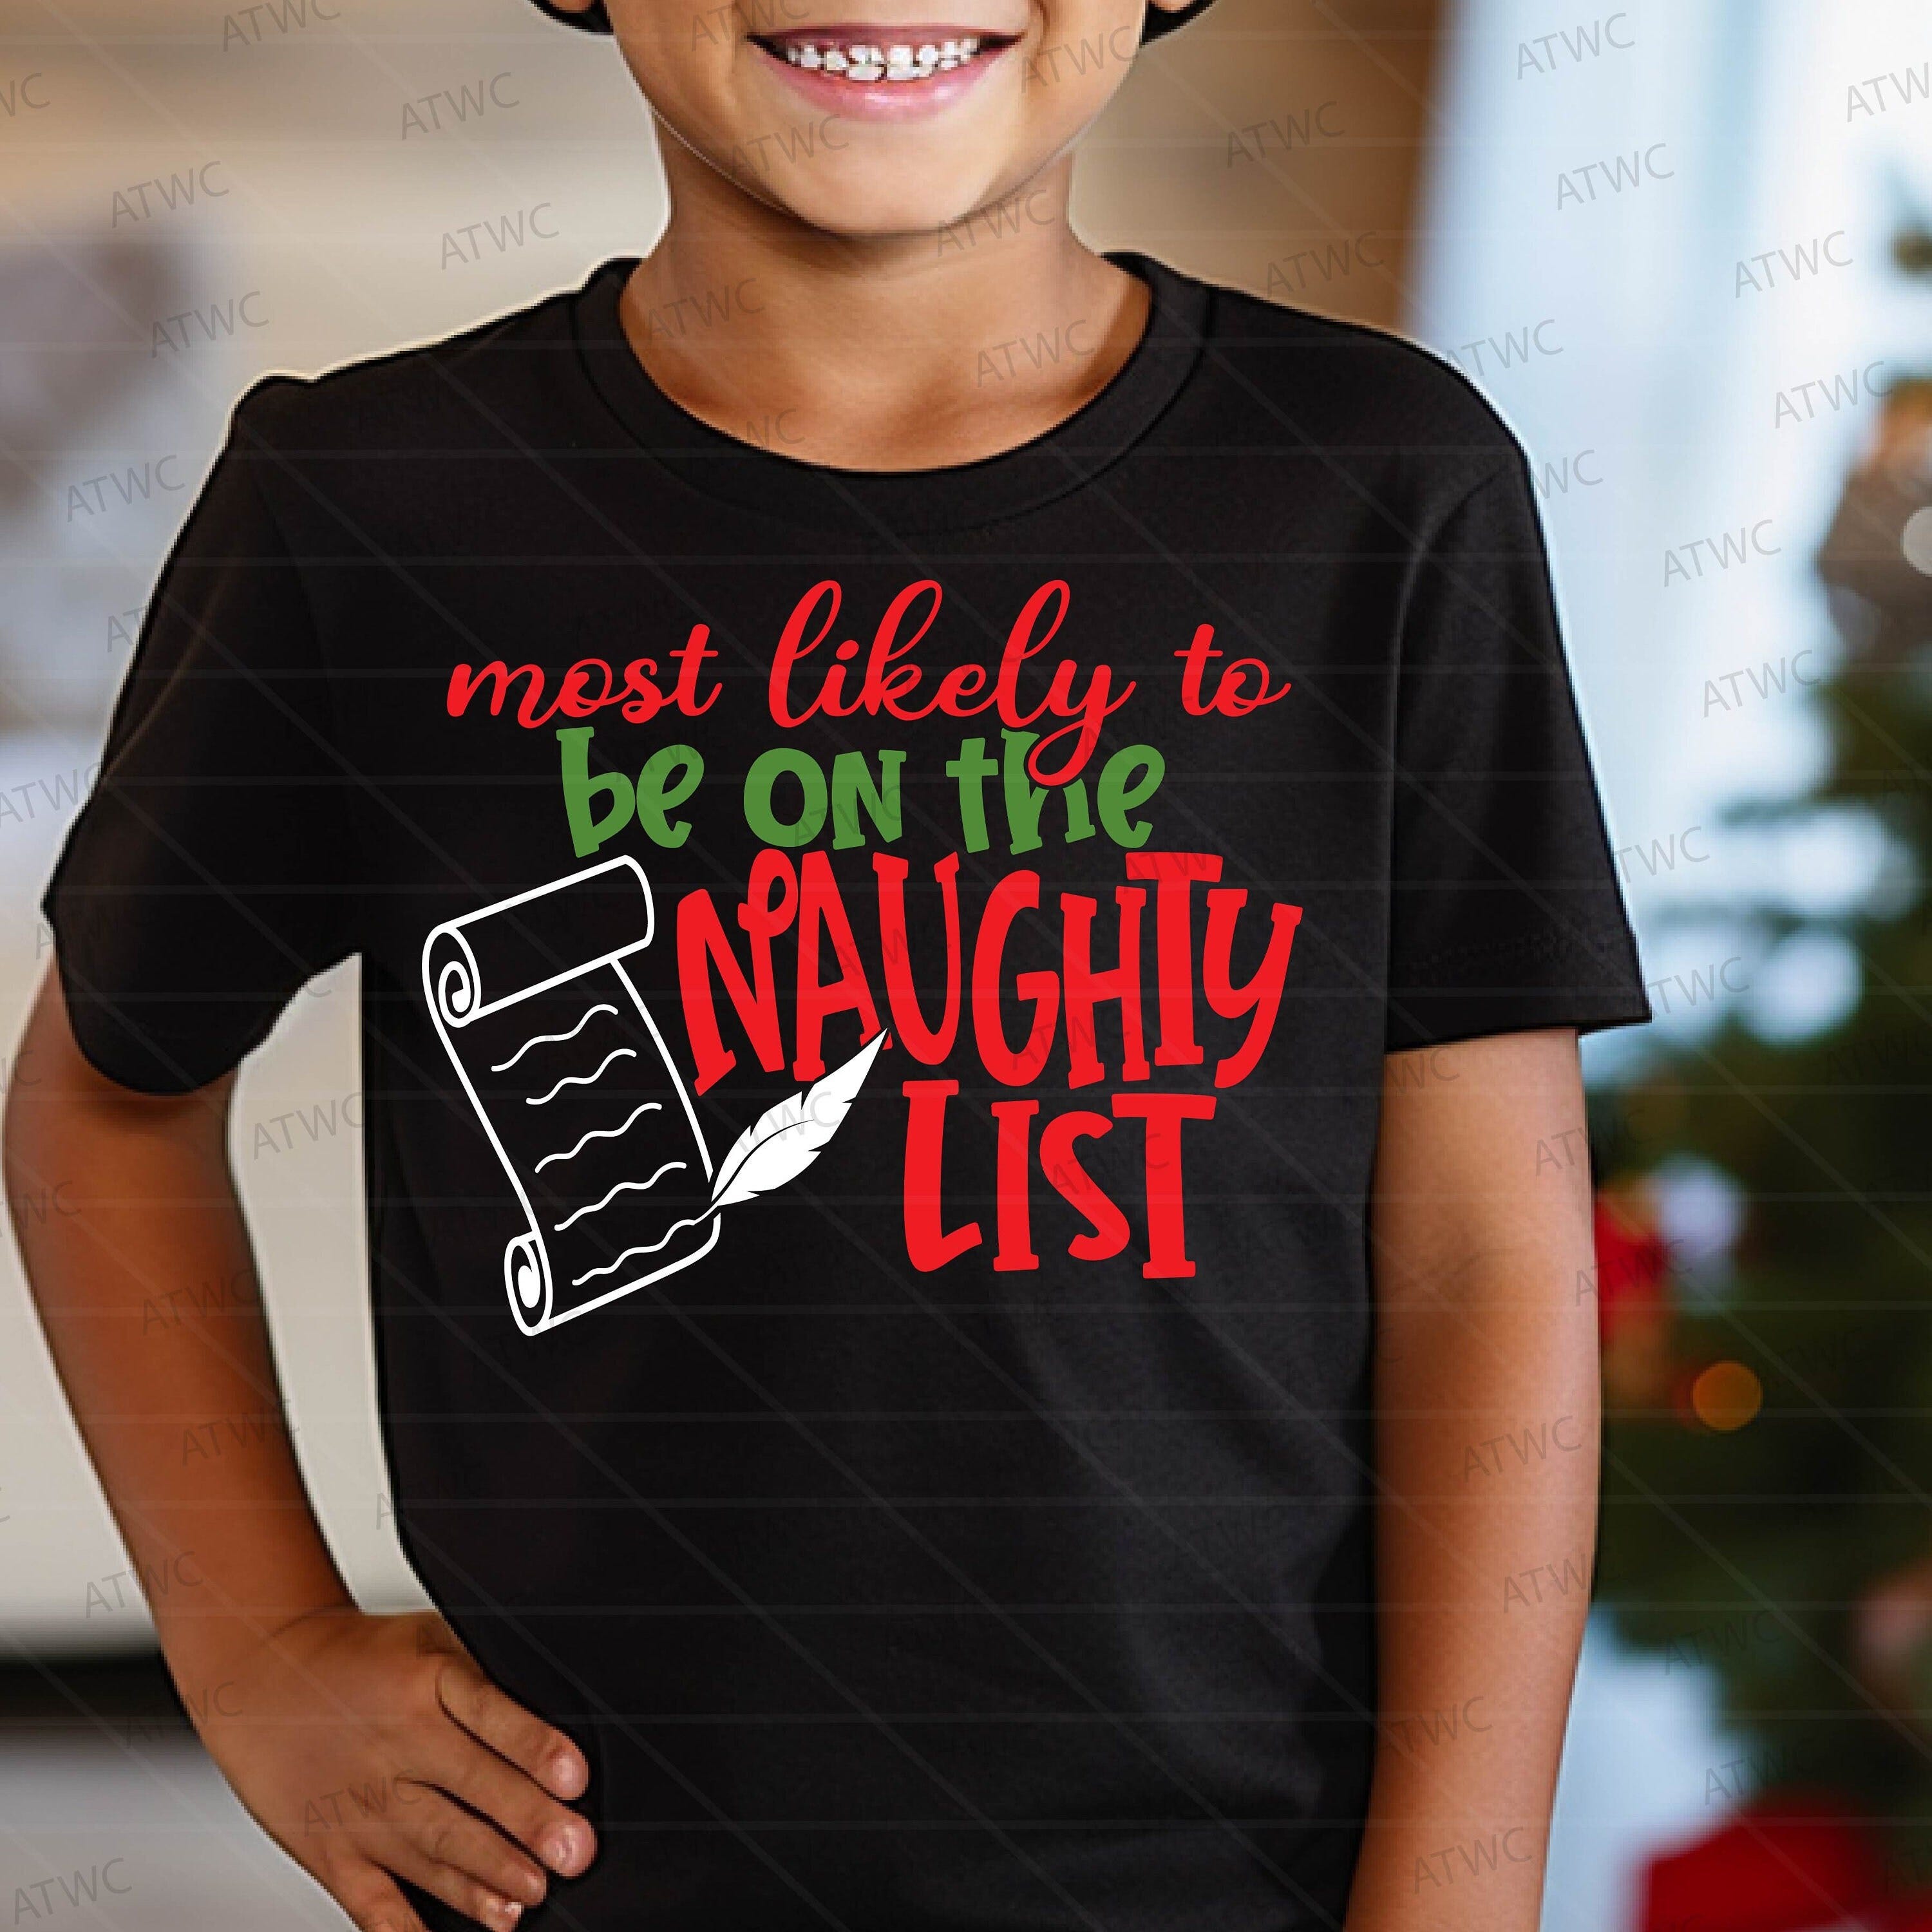 Most Likely to Be on the Naughty List DIGITAL SVG Cut File, Christmas svg,  Christmas Shirt svg, Child Christmas Shirt svg, Most Likely svg